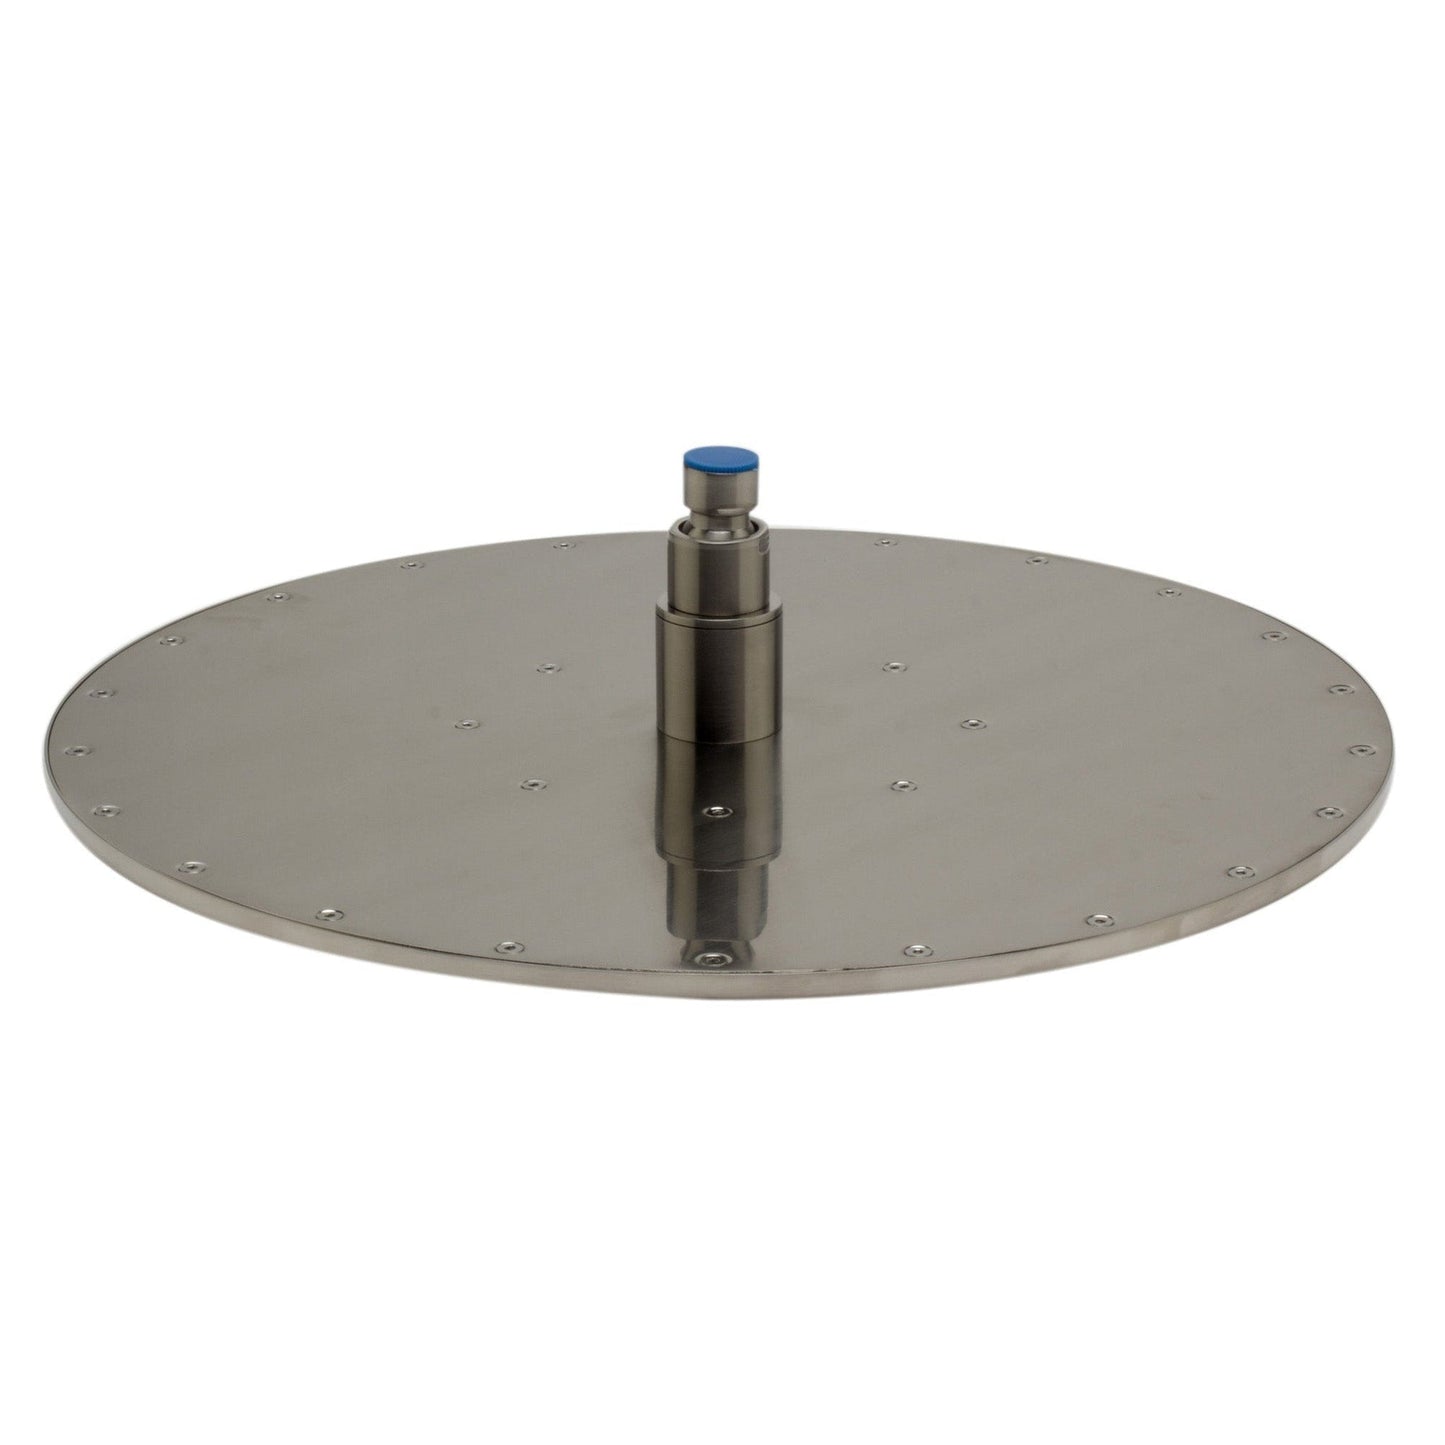 ALFI Brand LED16R-BN 16" Round Brushed Nickel Wall or Ceiling Mounted Multi Color LED Rain Brass Shower Head